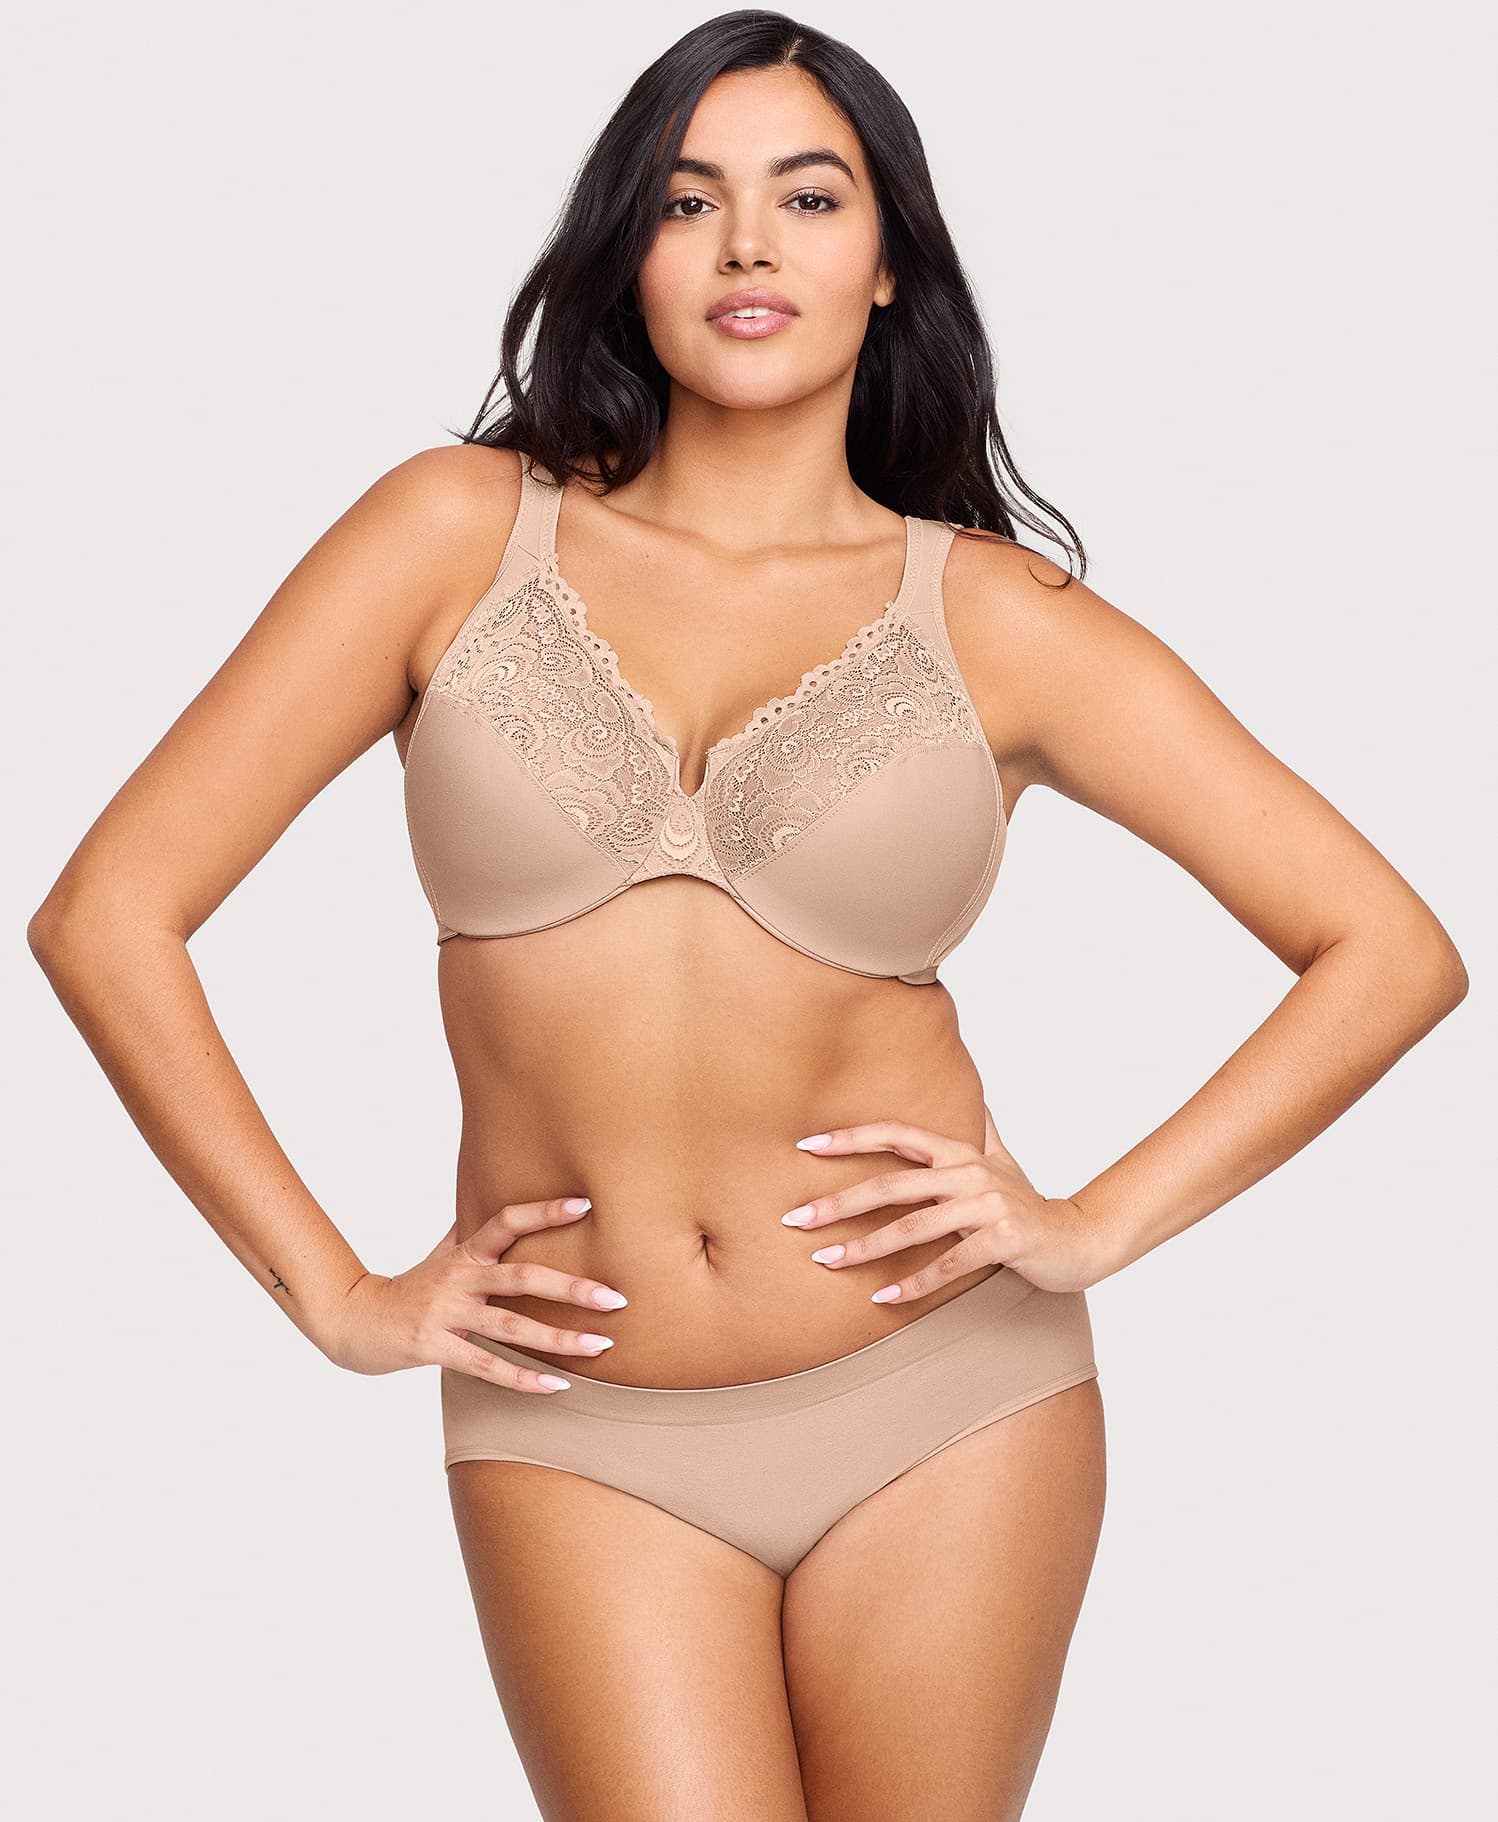 Full Cup Lace Plus Size Bra For 36B To 50DDD, 53% OFF